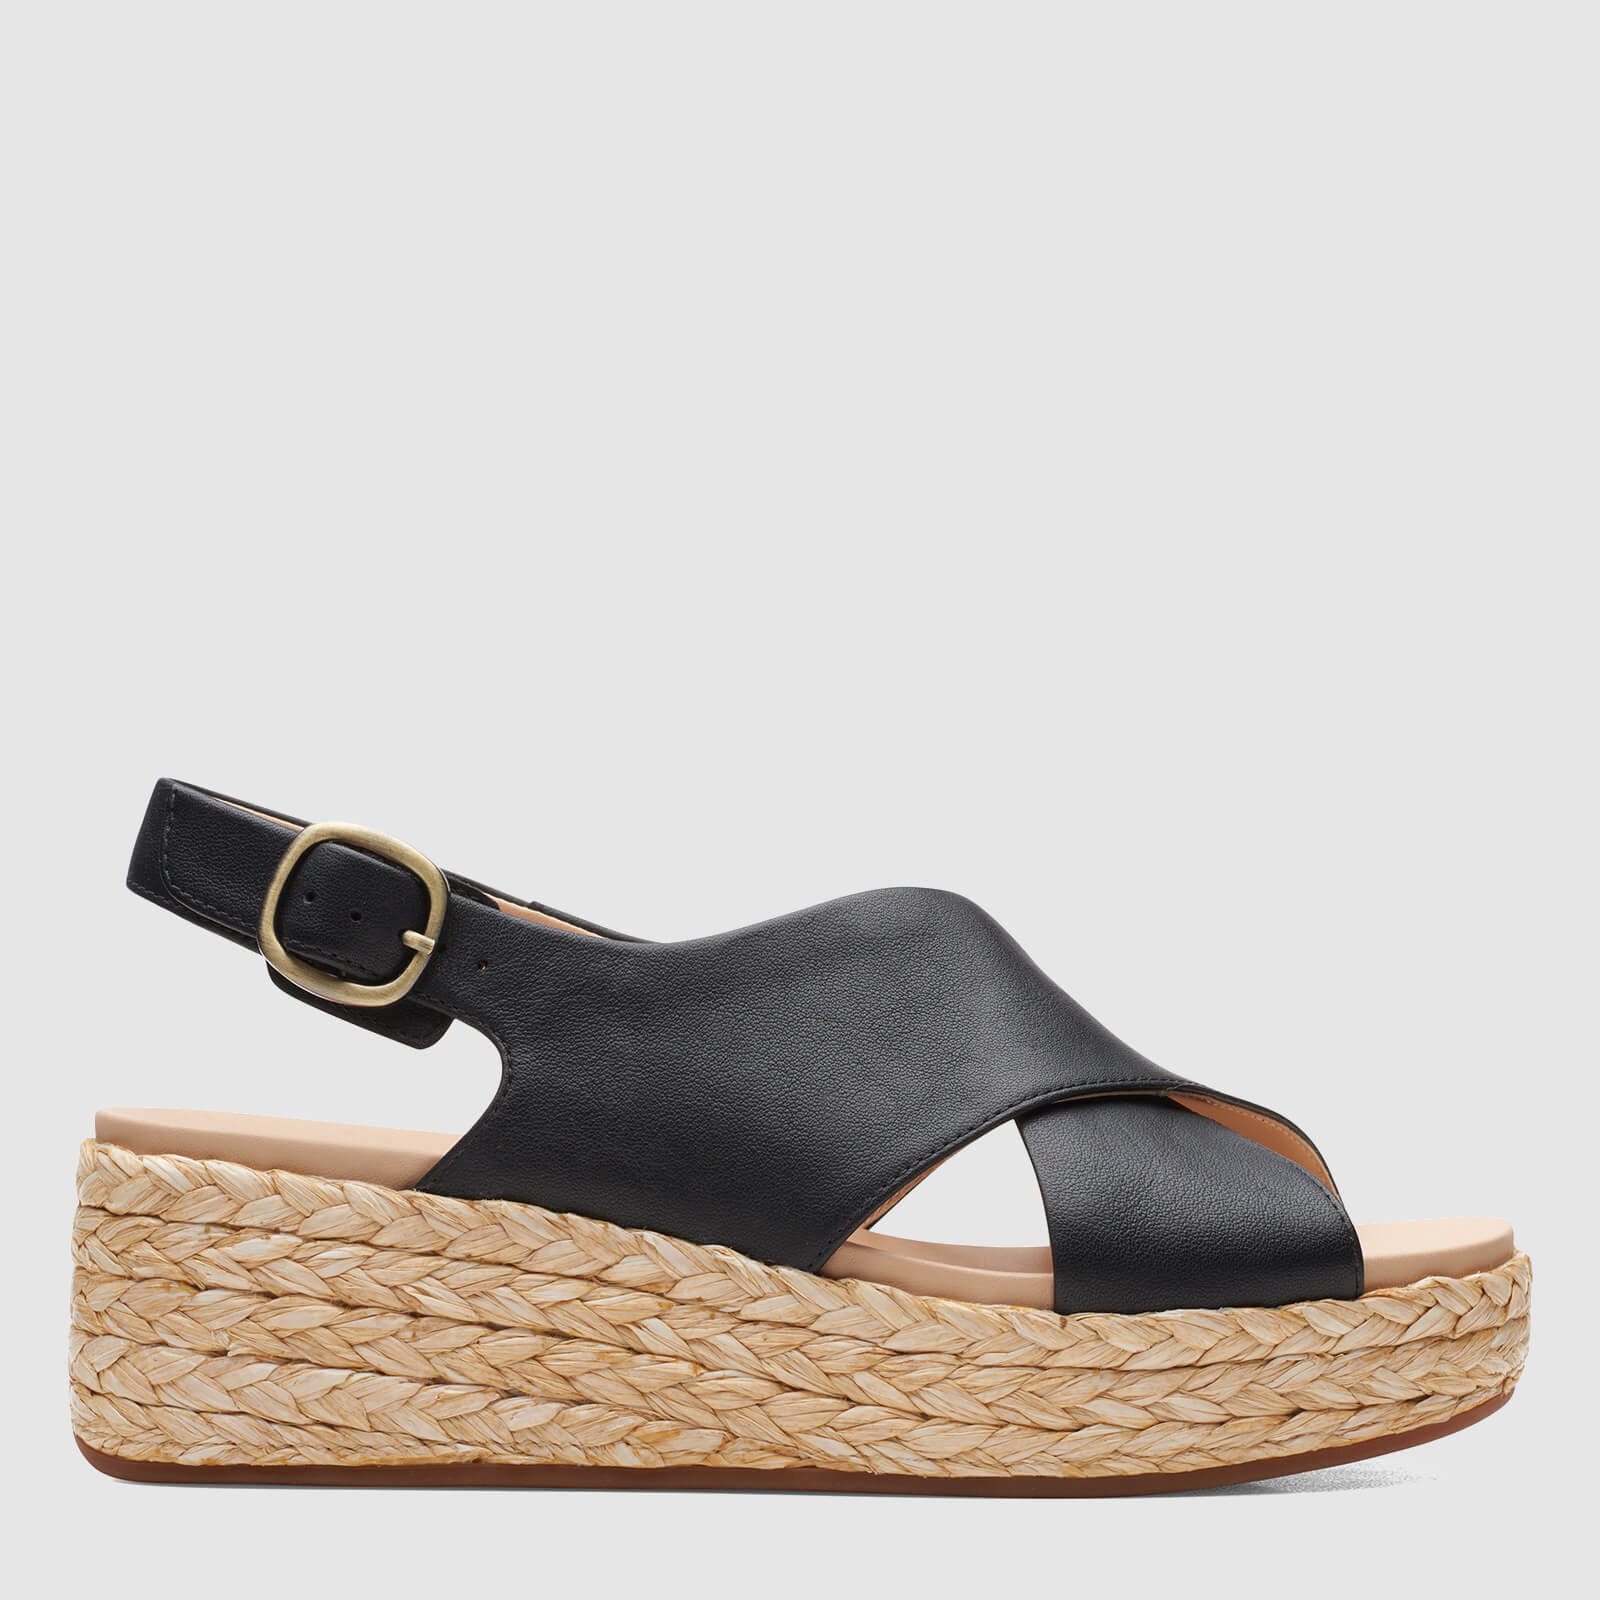 Image of Clarks Women's Kimmei Cross Leather Wedged Sandals - Black - UK 3